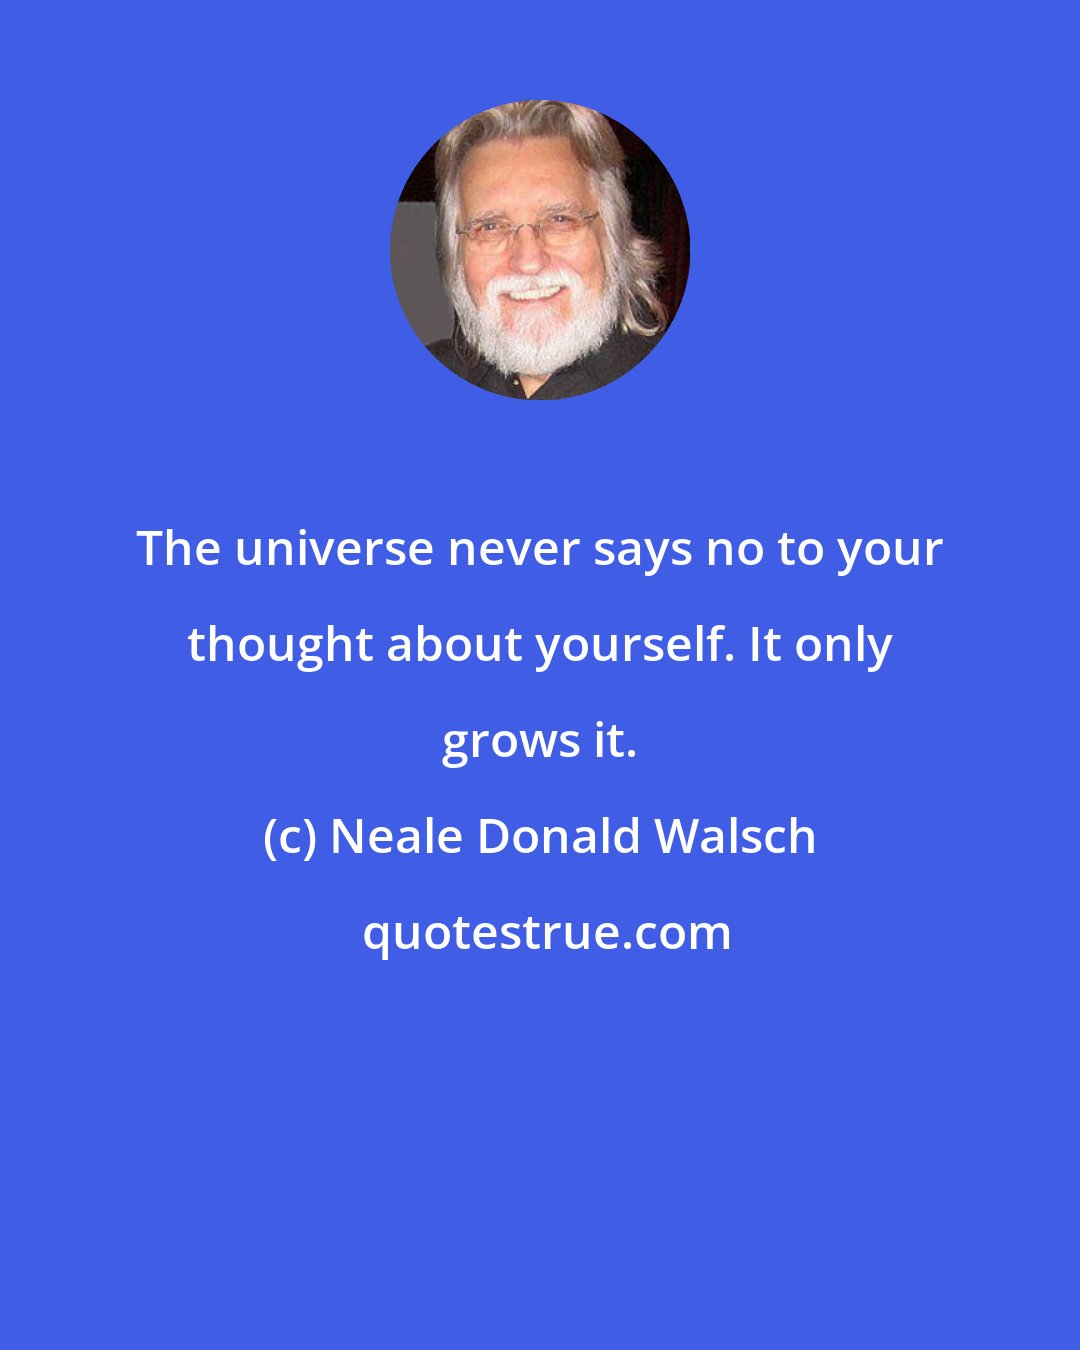 Neale Donald Walsch: The universe never says no to your thought about yourself. It only grows it.